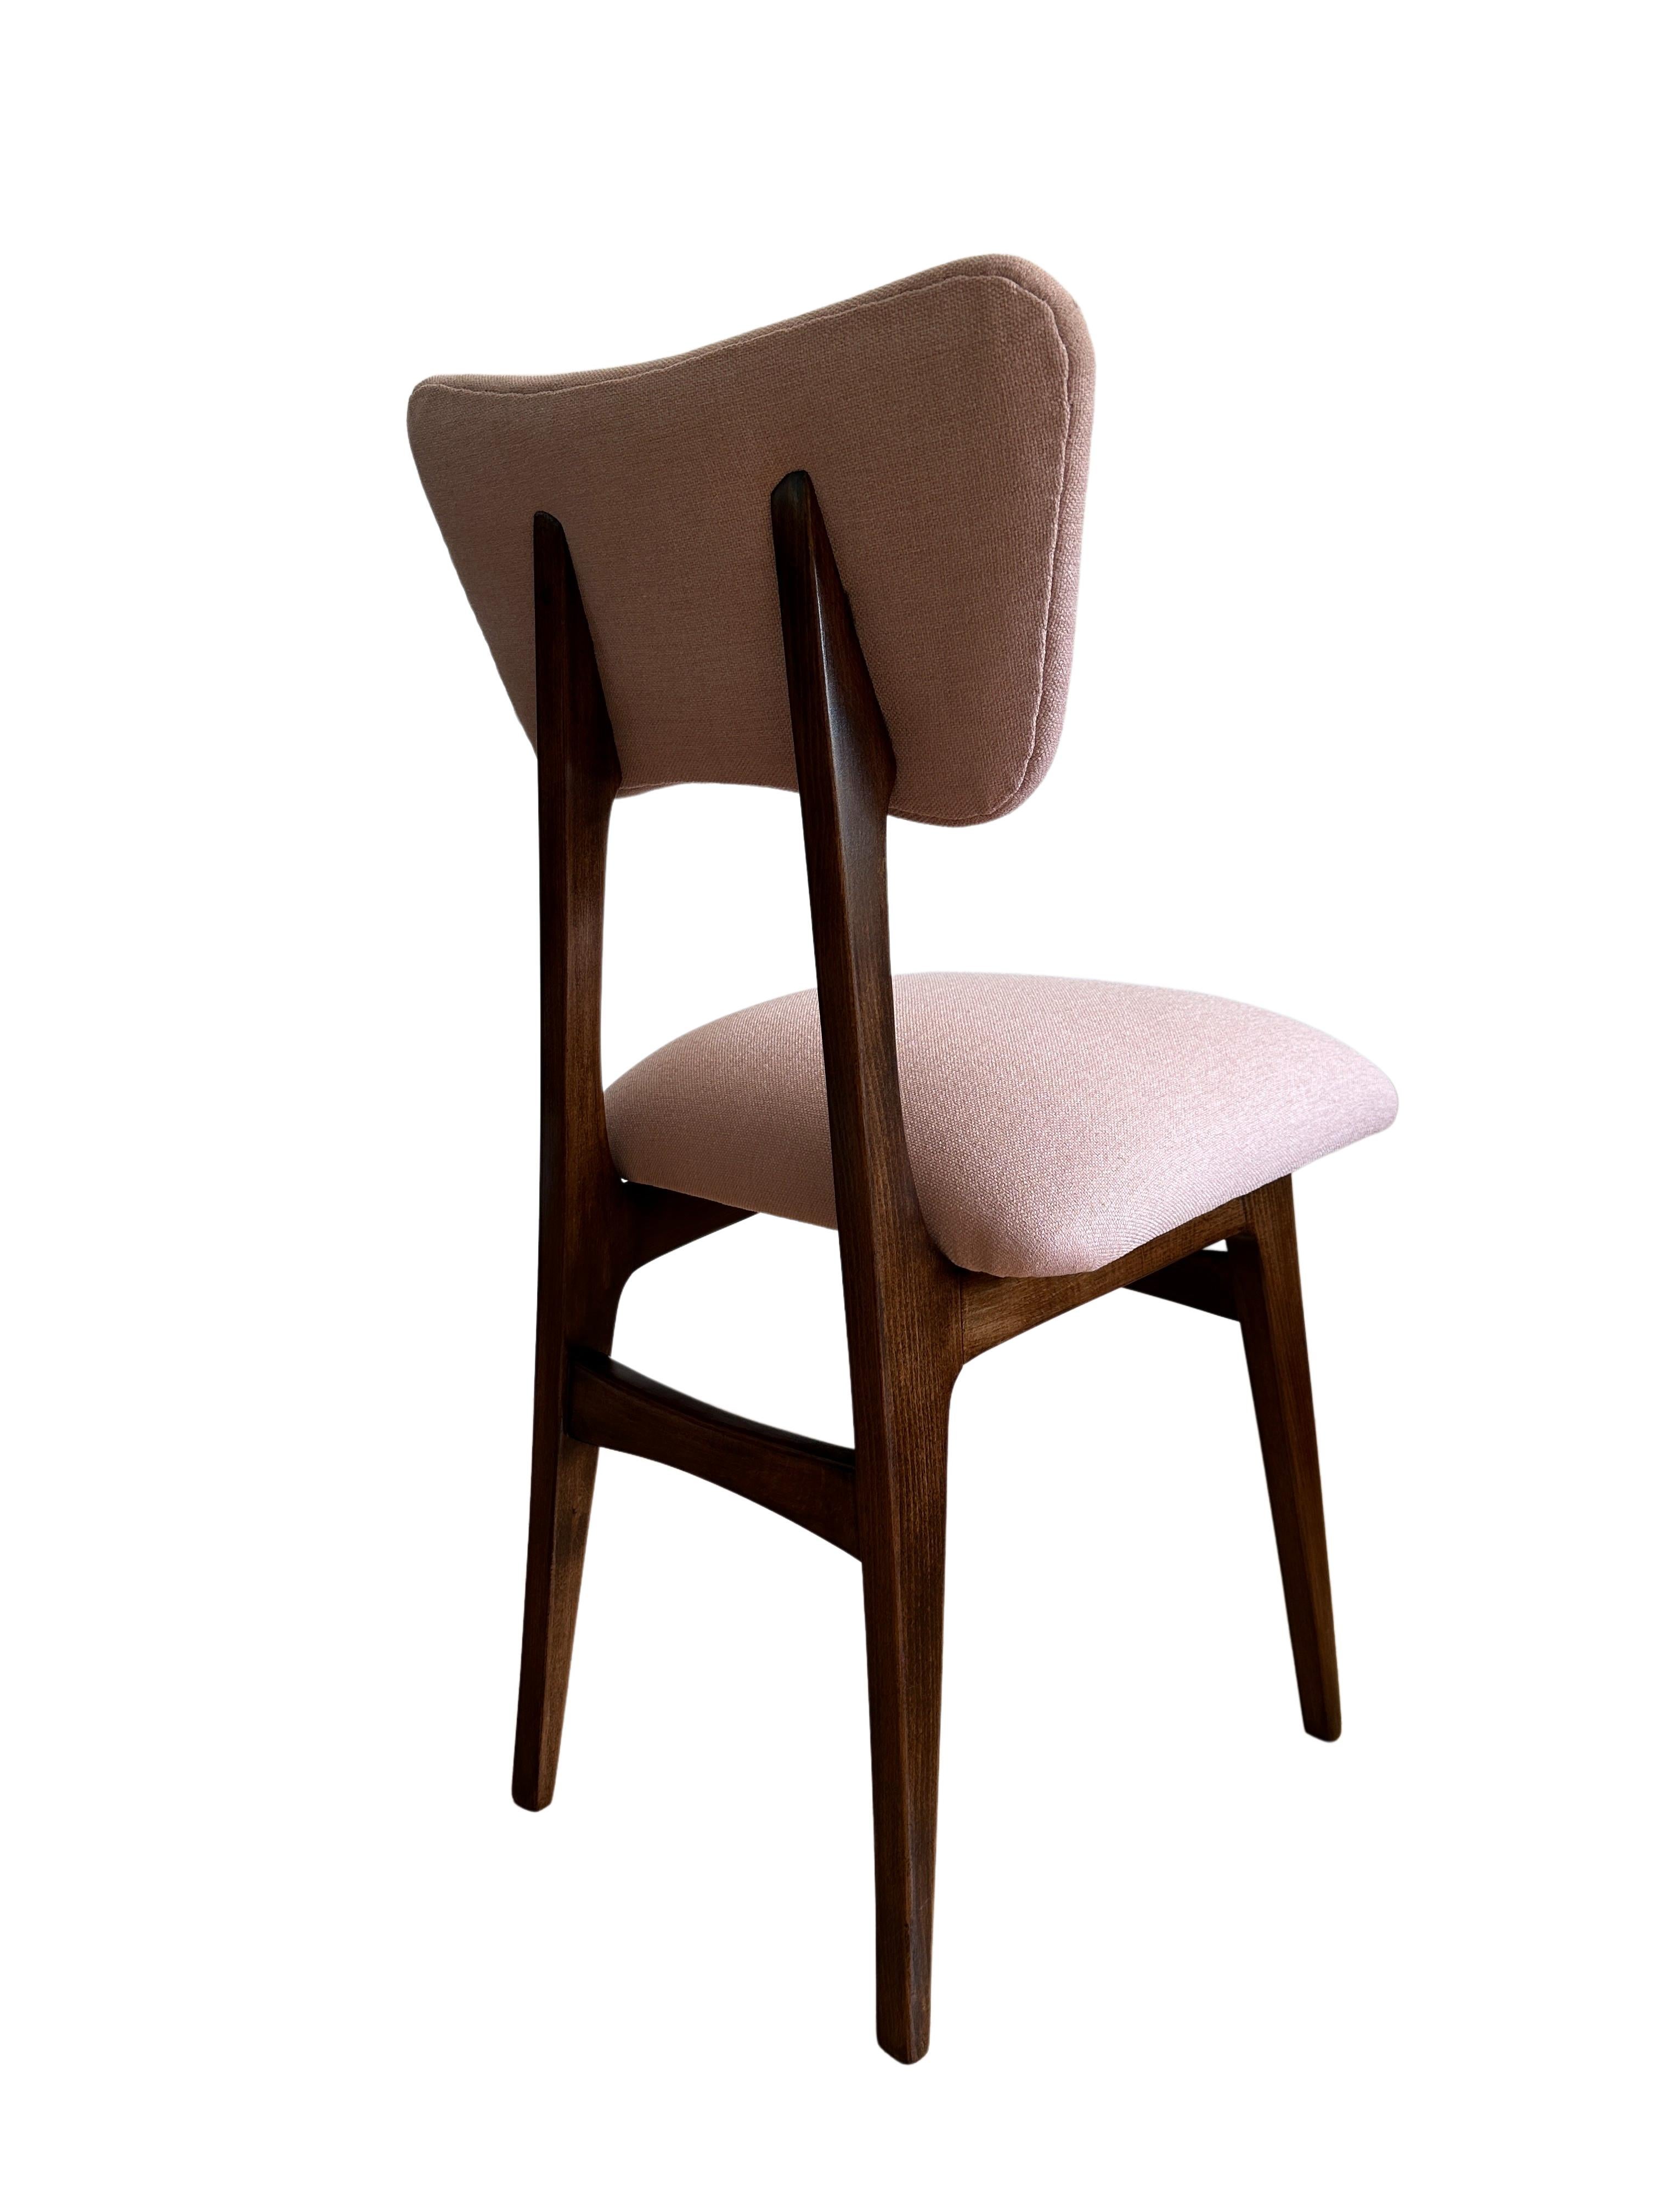 20th Century Midcentury Wooden Dining Chair in Light Pink Upholstery, Europe, 1960s For Sale